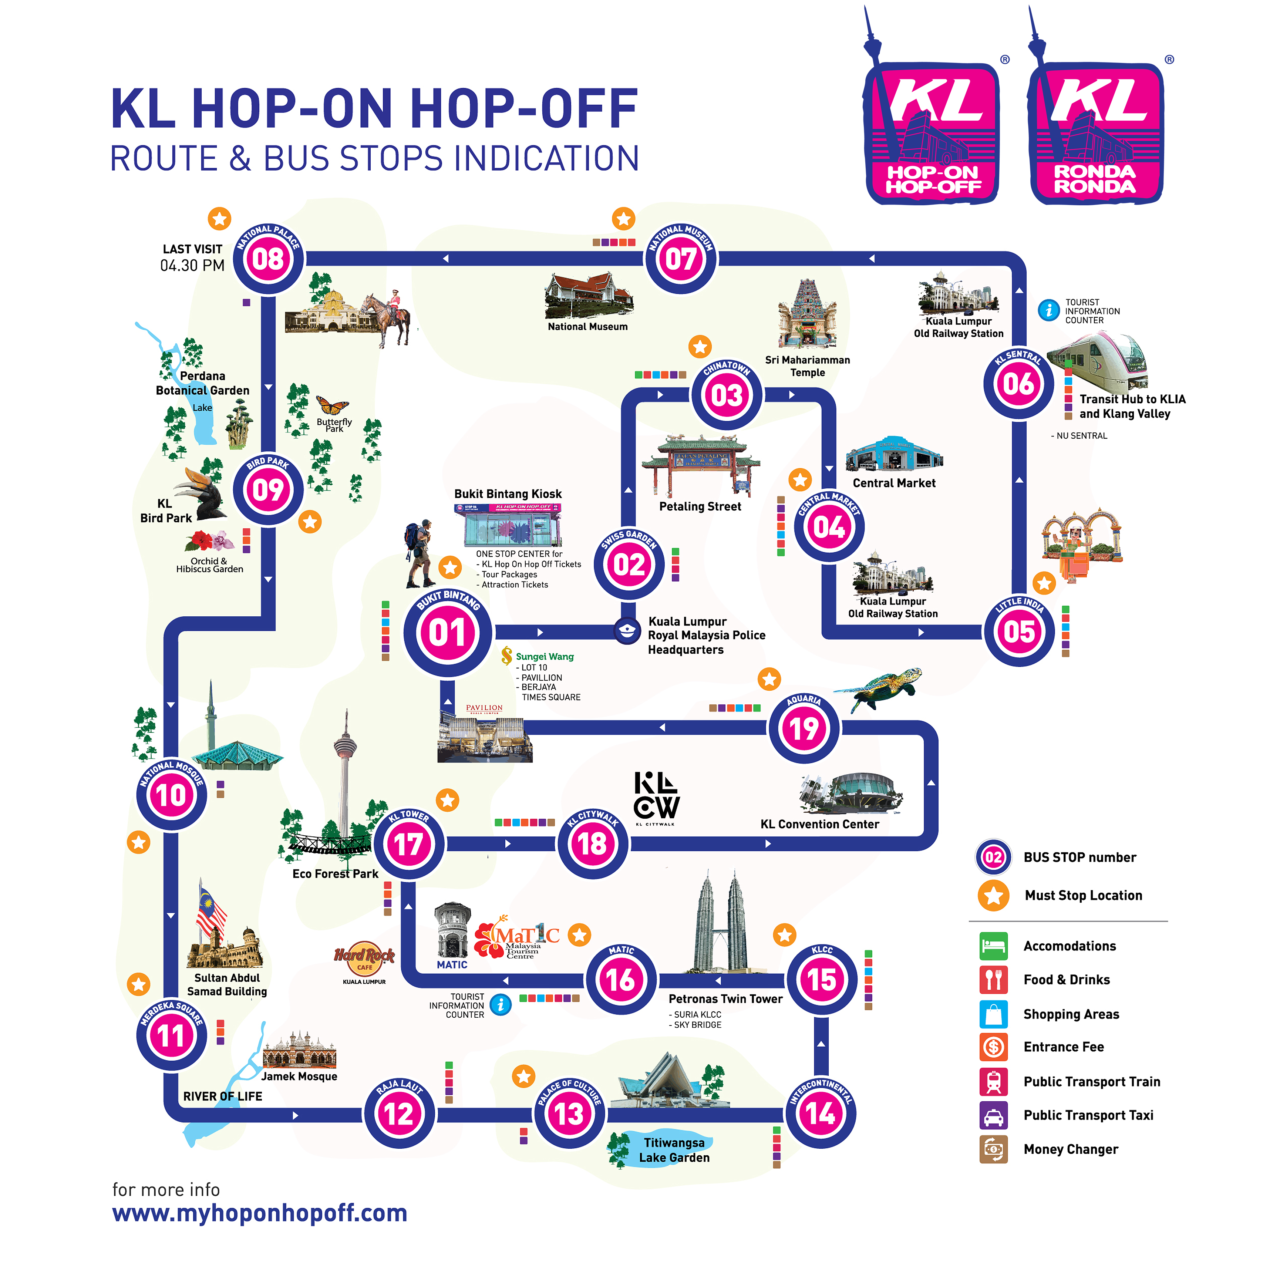 Hop On Hop Off Bus in Kuala Lumpur Route Itinerary